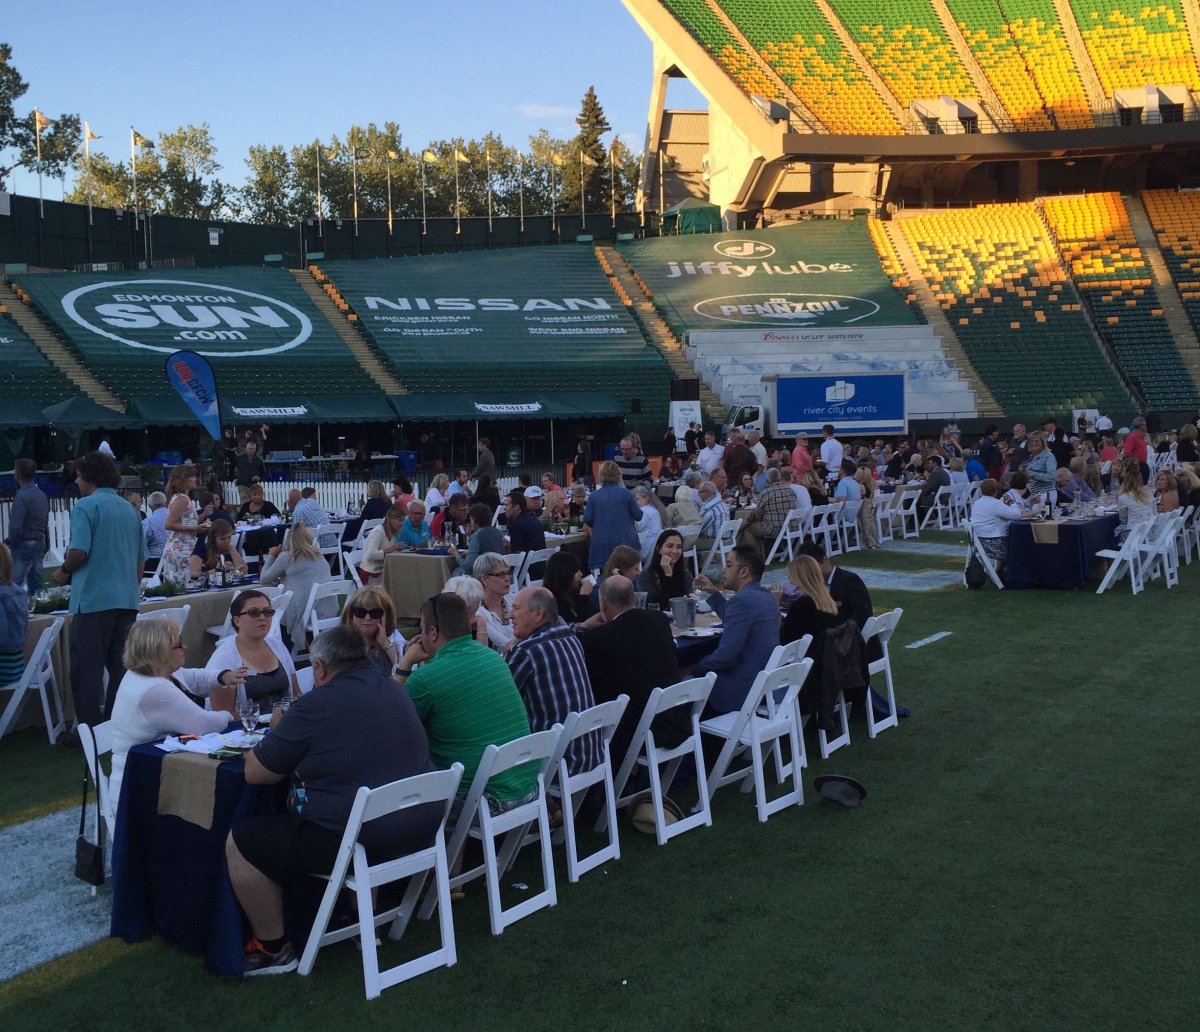 The second Feast on the Field took place Wednesday night at Commonwealth Stadium. Funds raised go to the CapitalCare Foundation to support the needs of local seniors.  August 17, 2016.